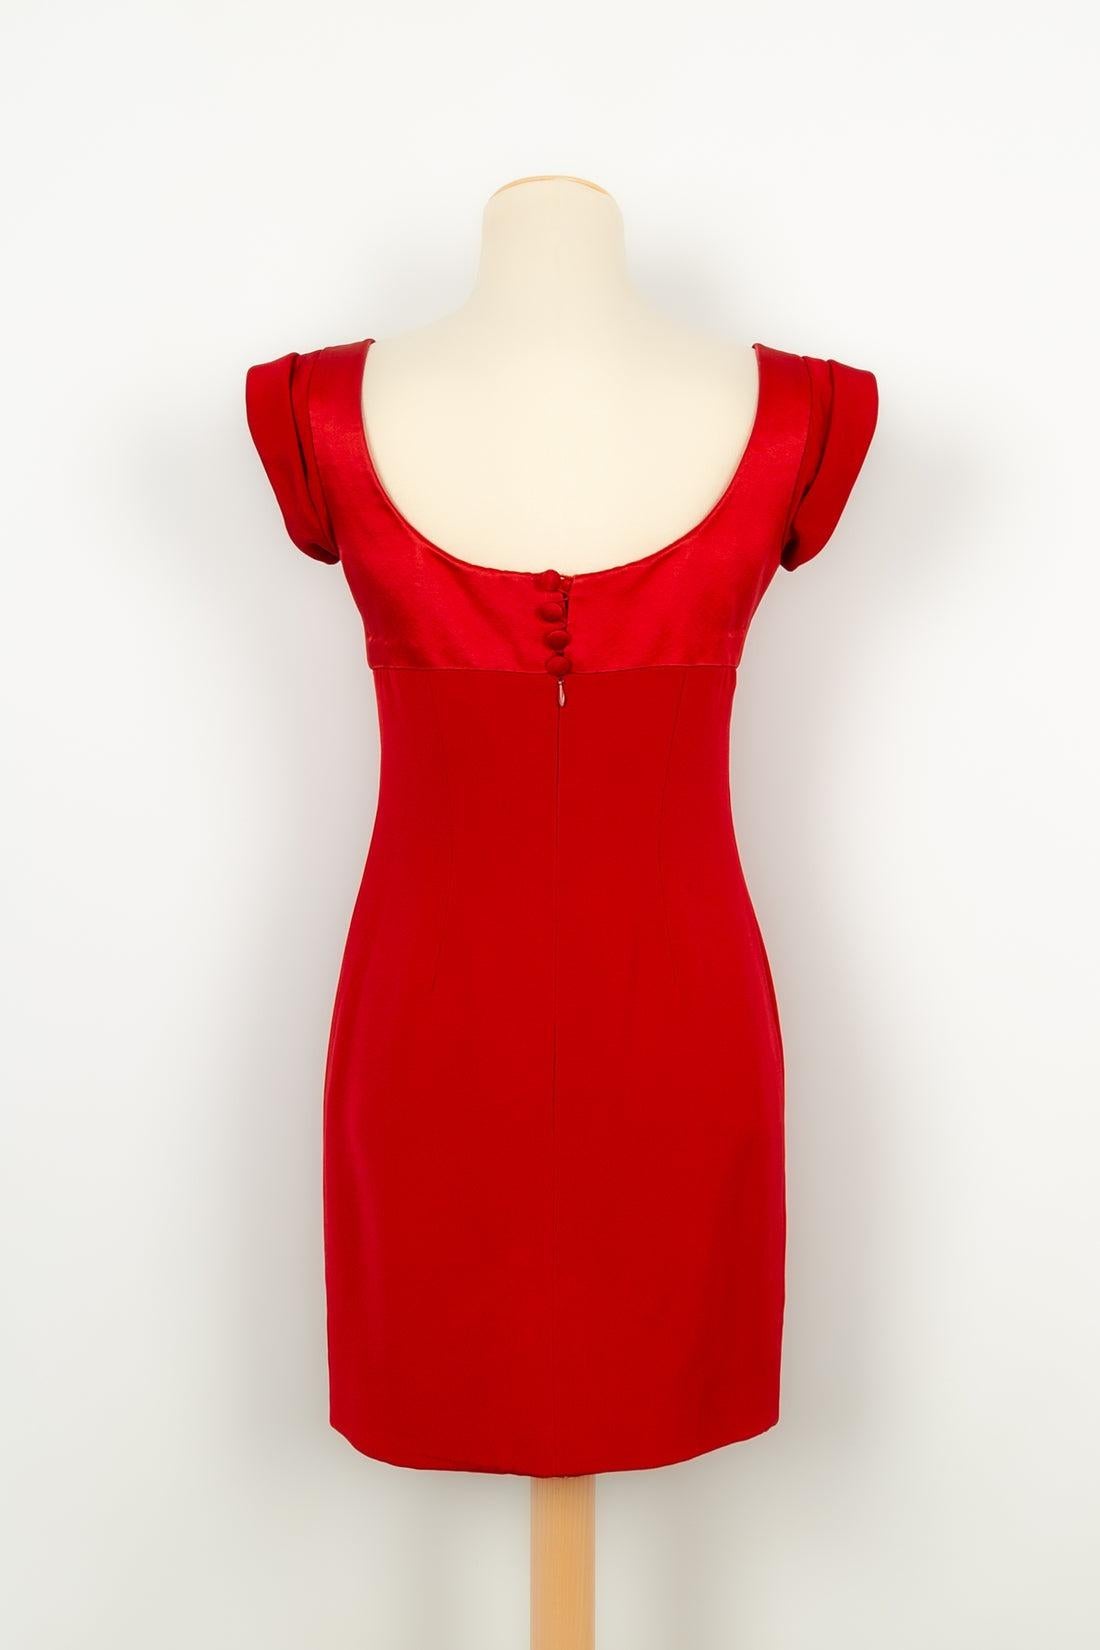 Christian Lacroix Haute Couture Dress in Red Silk with Silk Lining, 1995 In Excellent Condition For Sale In SAINT-OUEN-SUR-SEINE, FR